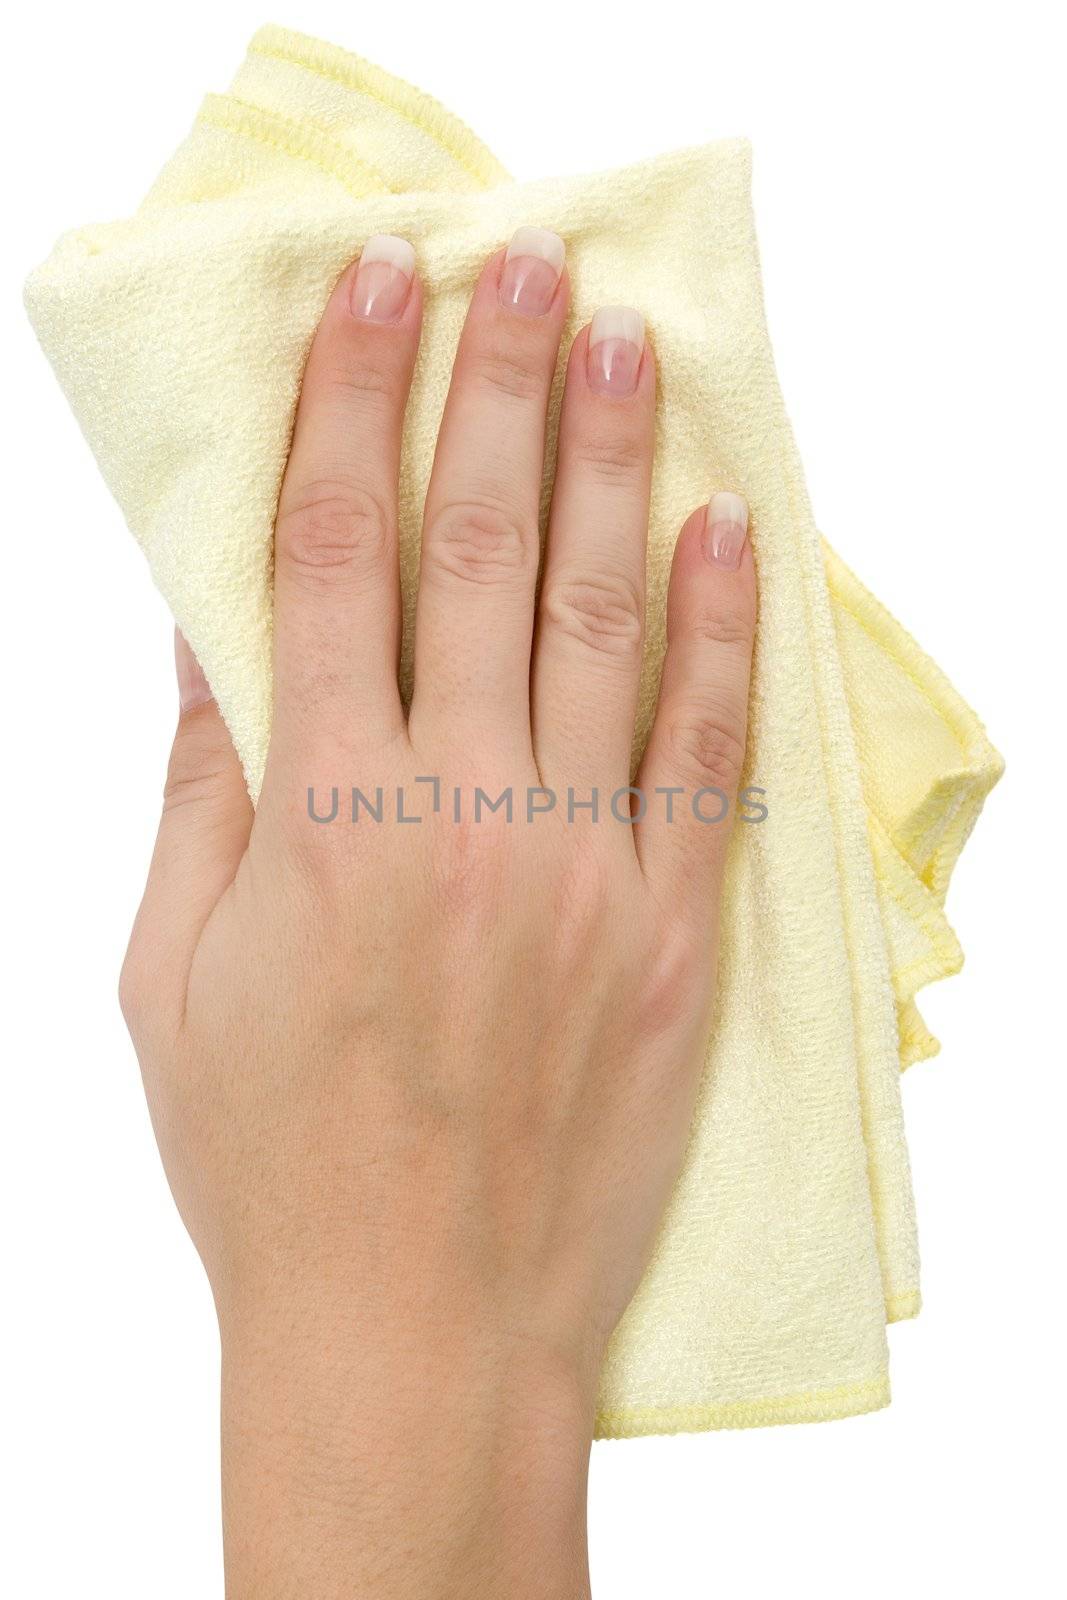 Female hand wiping with a yellow rag. Isolated on a white background.